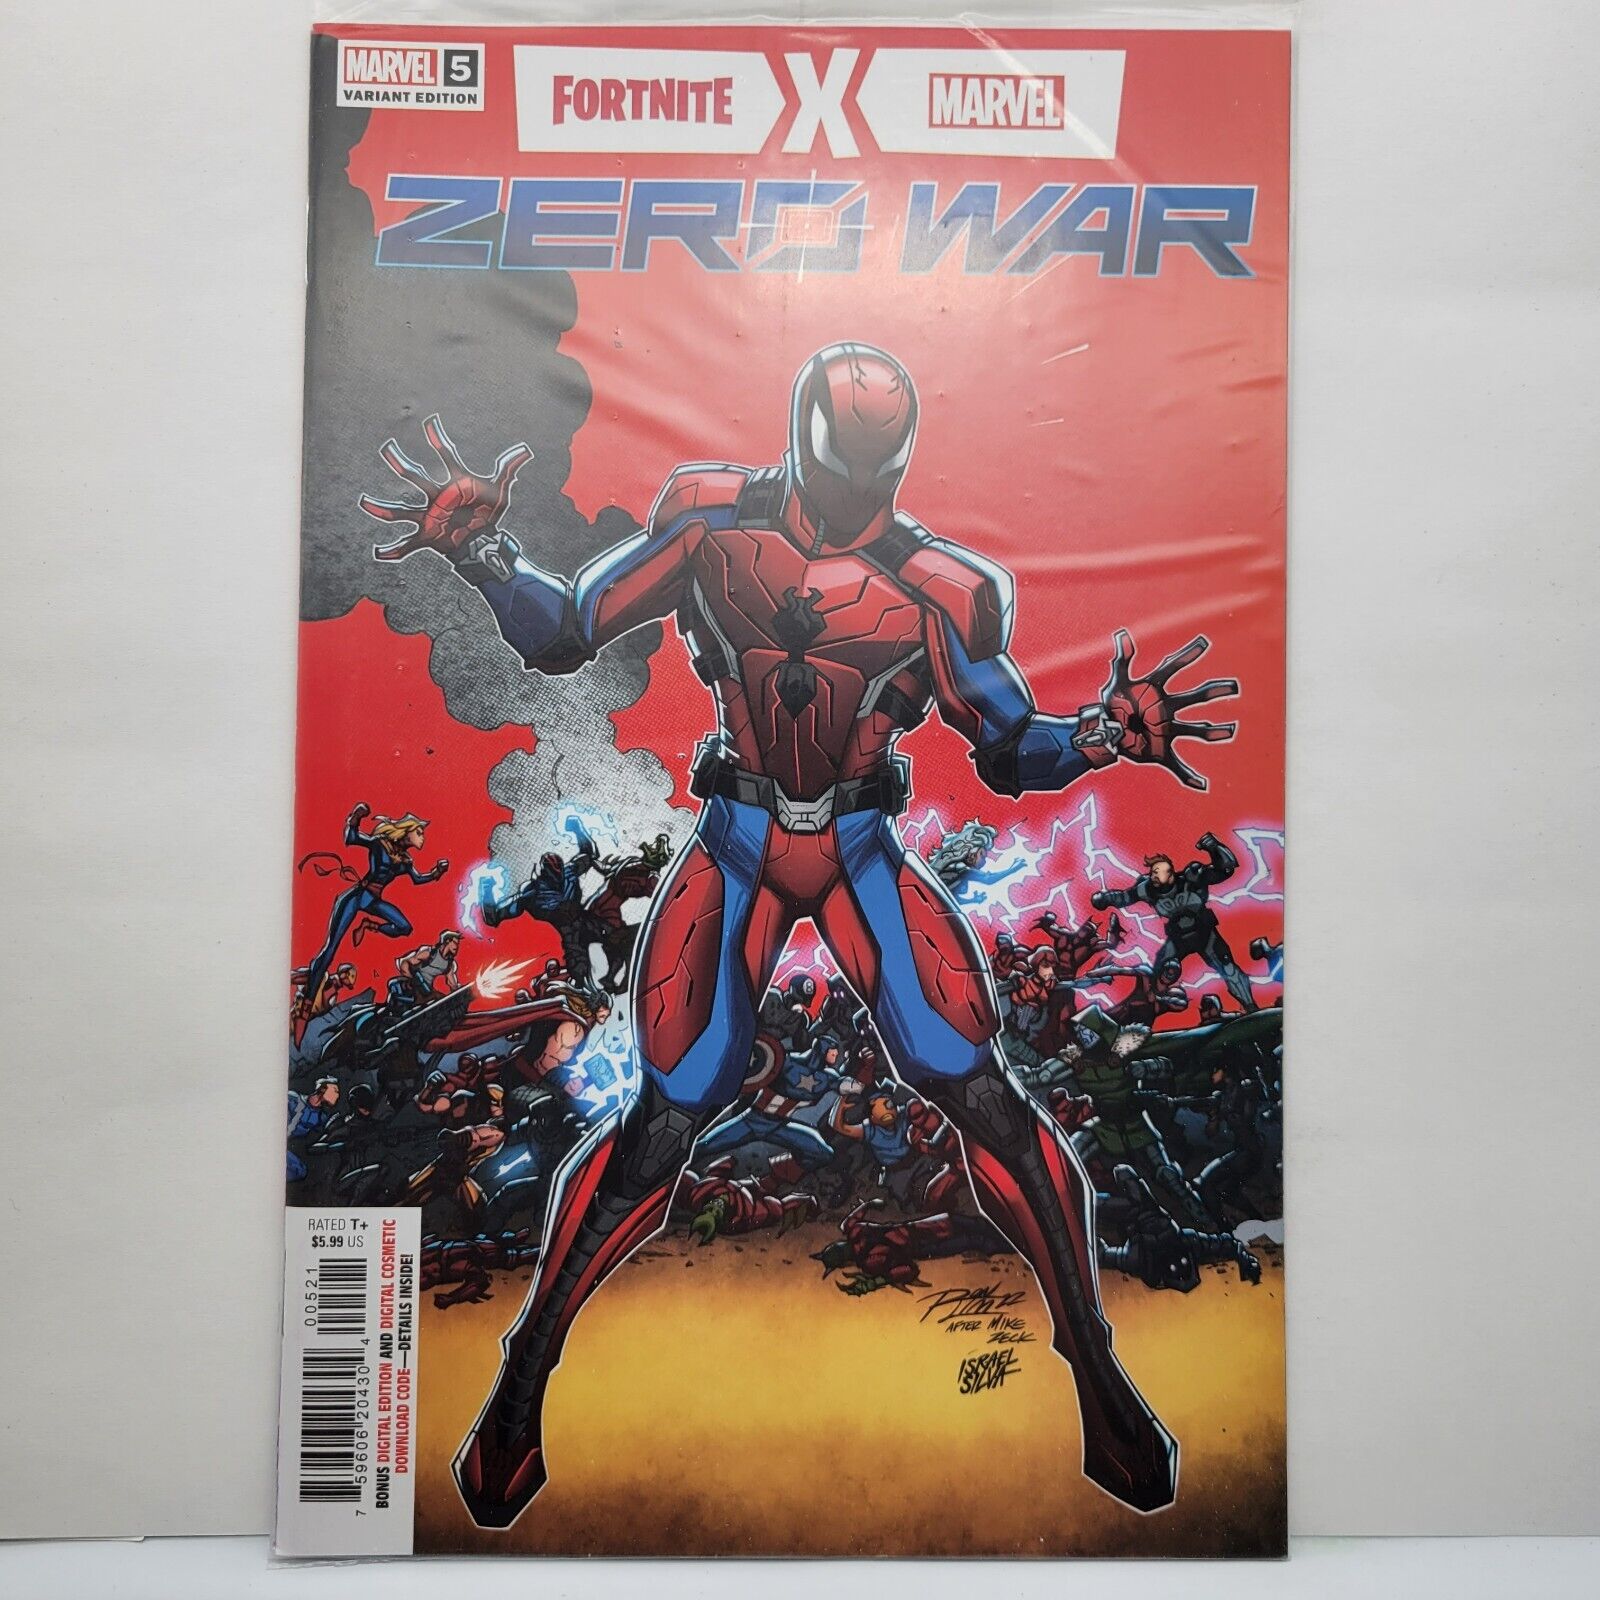 Fortnite X Marvel Zero War #5 Variant Ron Lim Cover Poly Bagged Sealed Code MCU